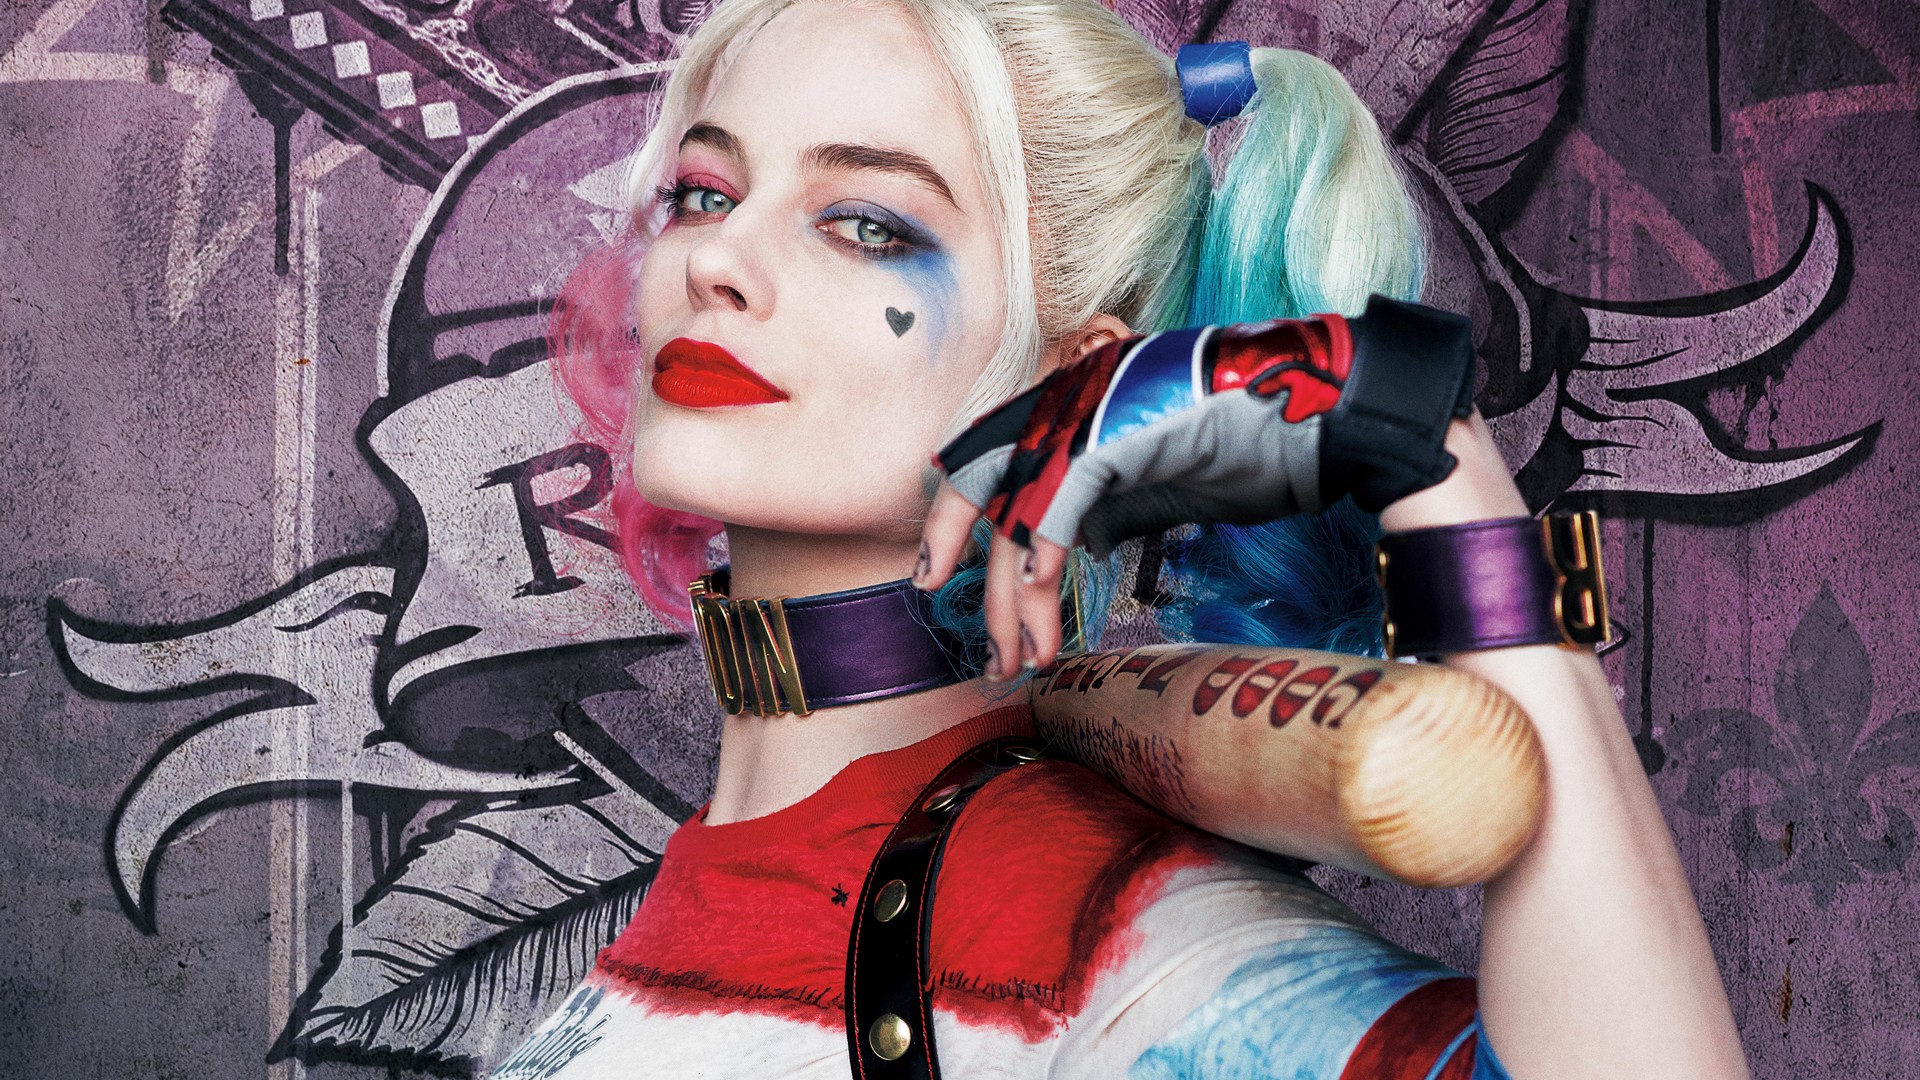 Wallpaper Harley Quinn with image resolution 1920x1080 pixel. You can use this wallpaper as background for your desktop Computer Screensavers, Android or iPhone smartphones